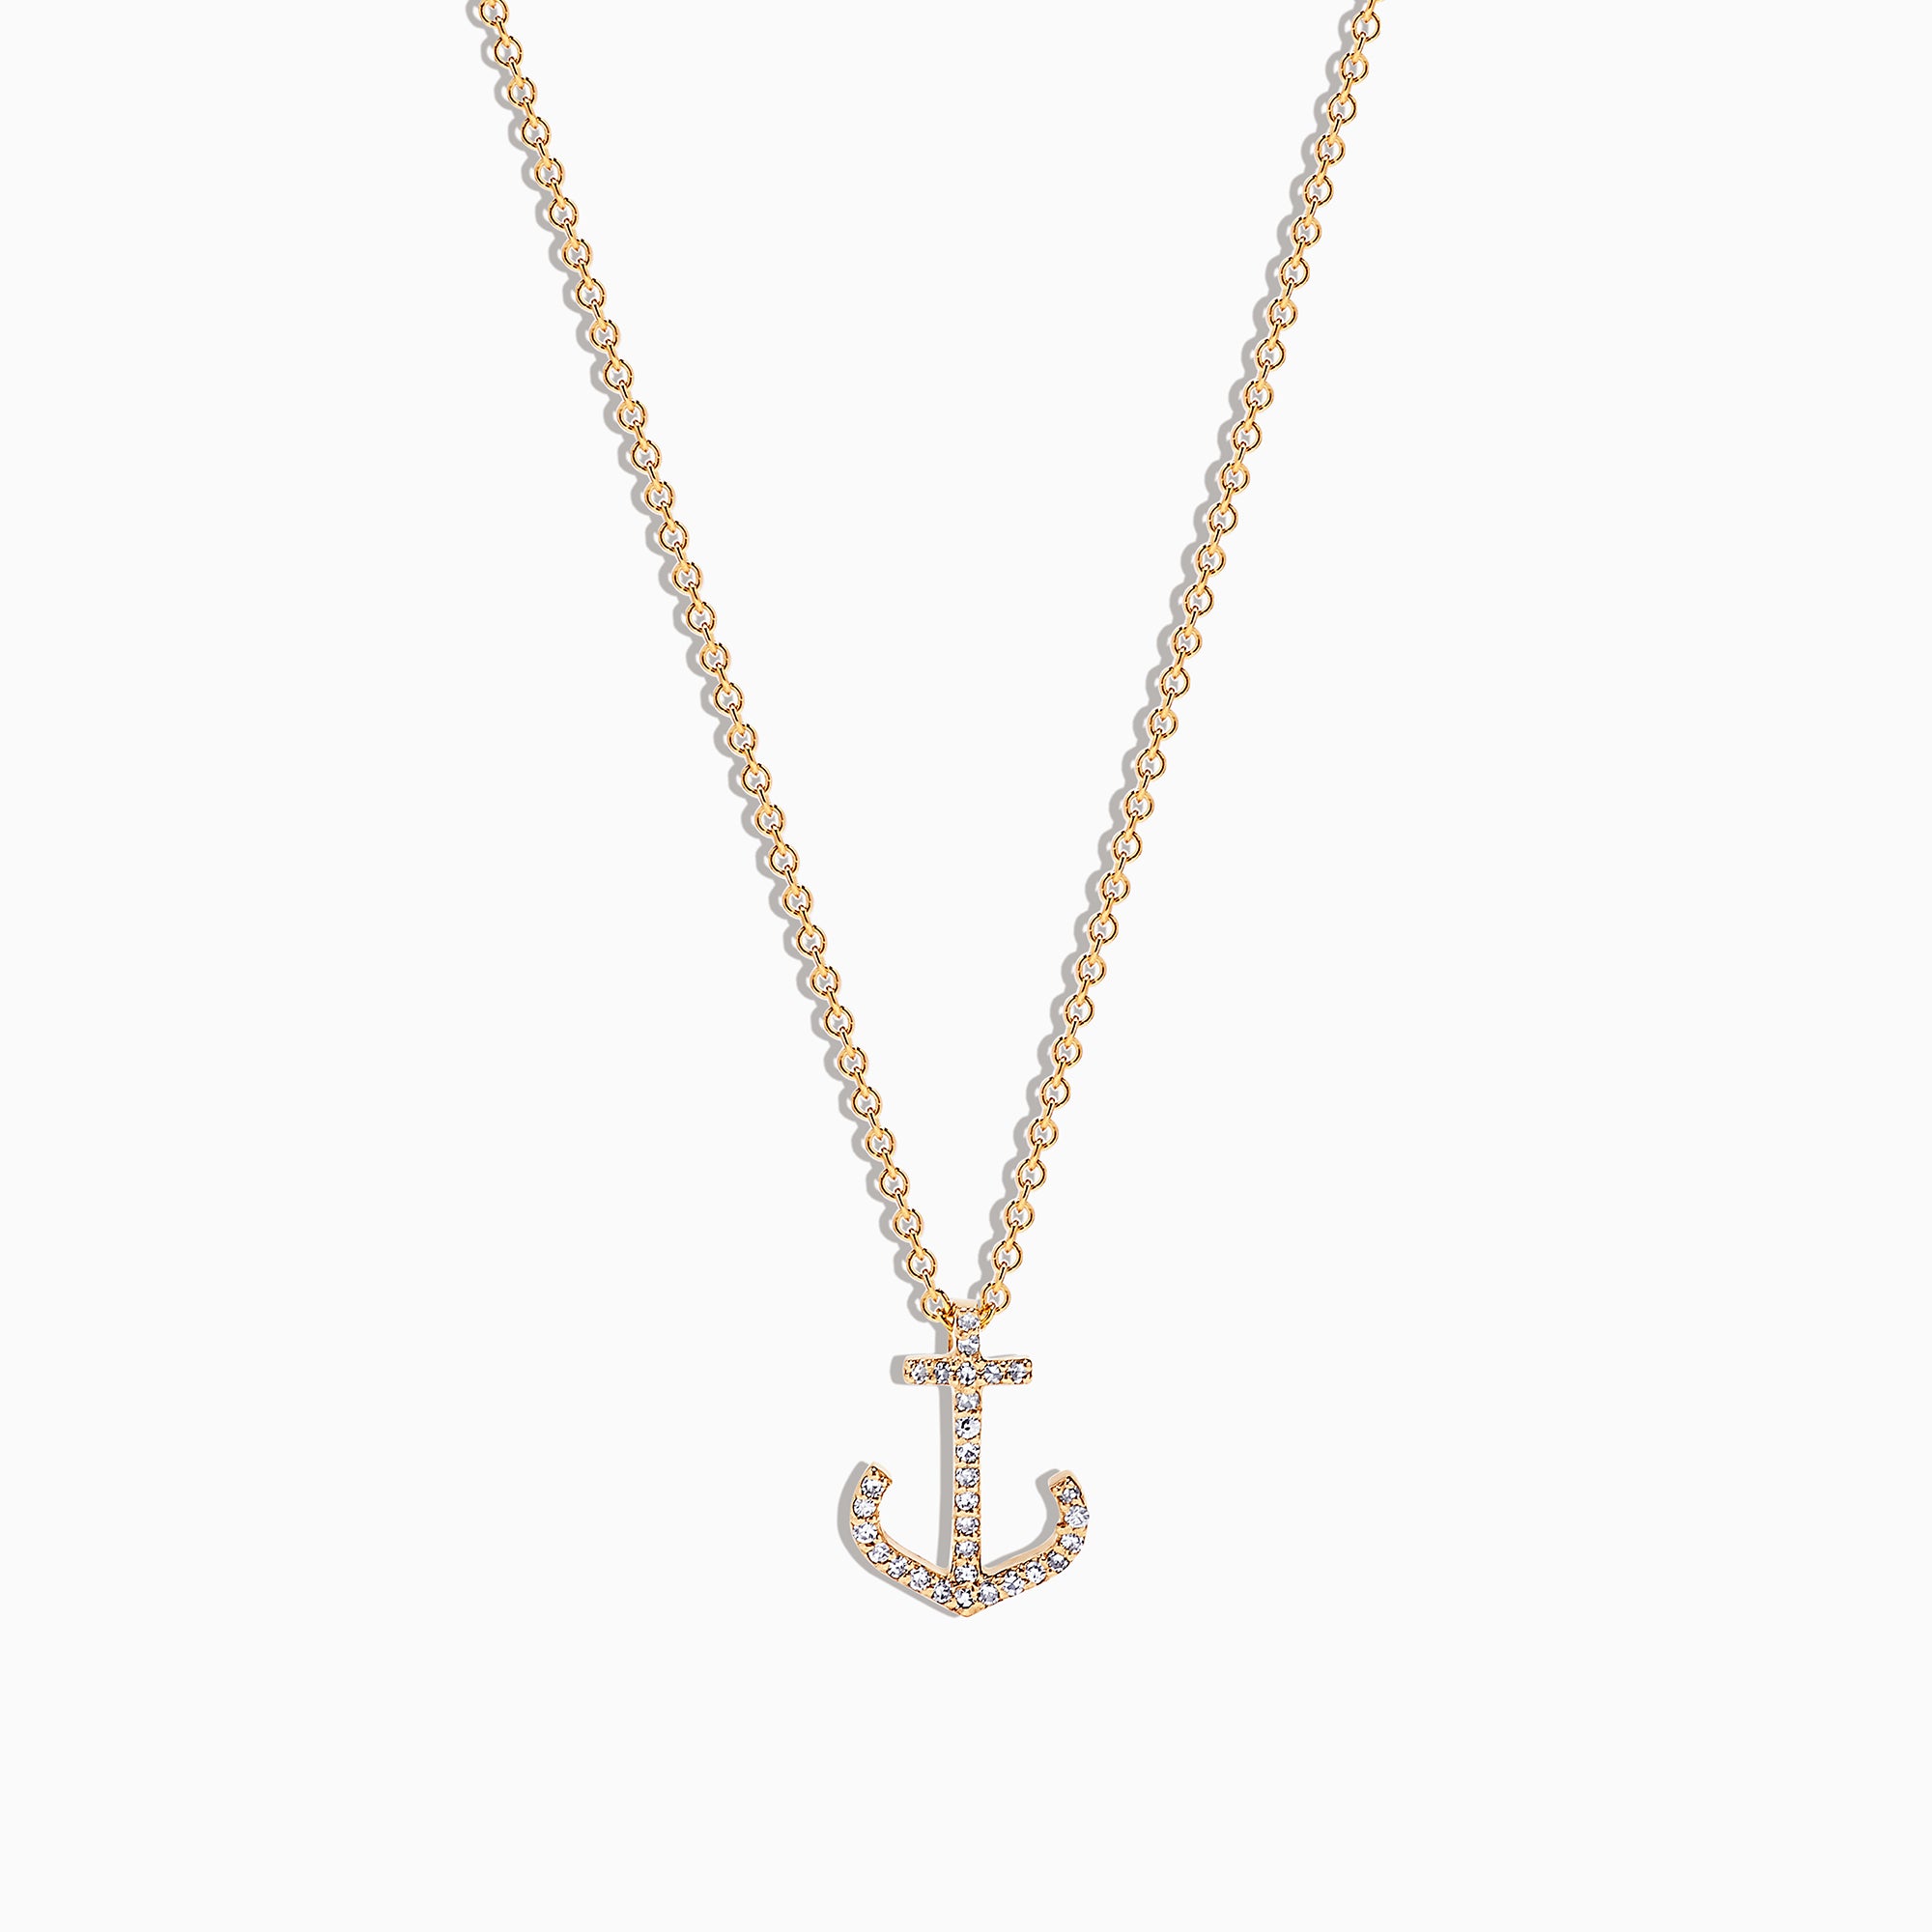 Silver colored chain with anchor pendant. #Coastal... - Depop